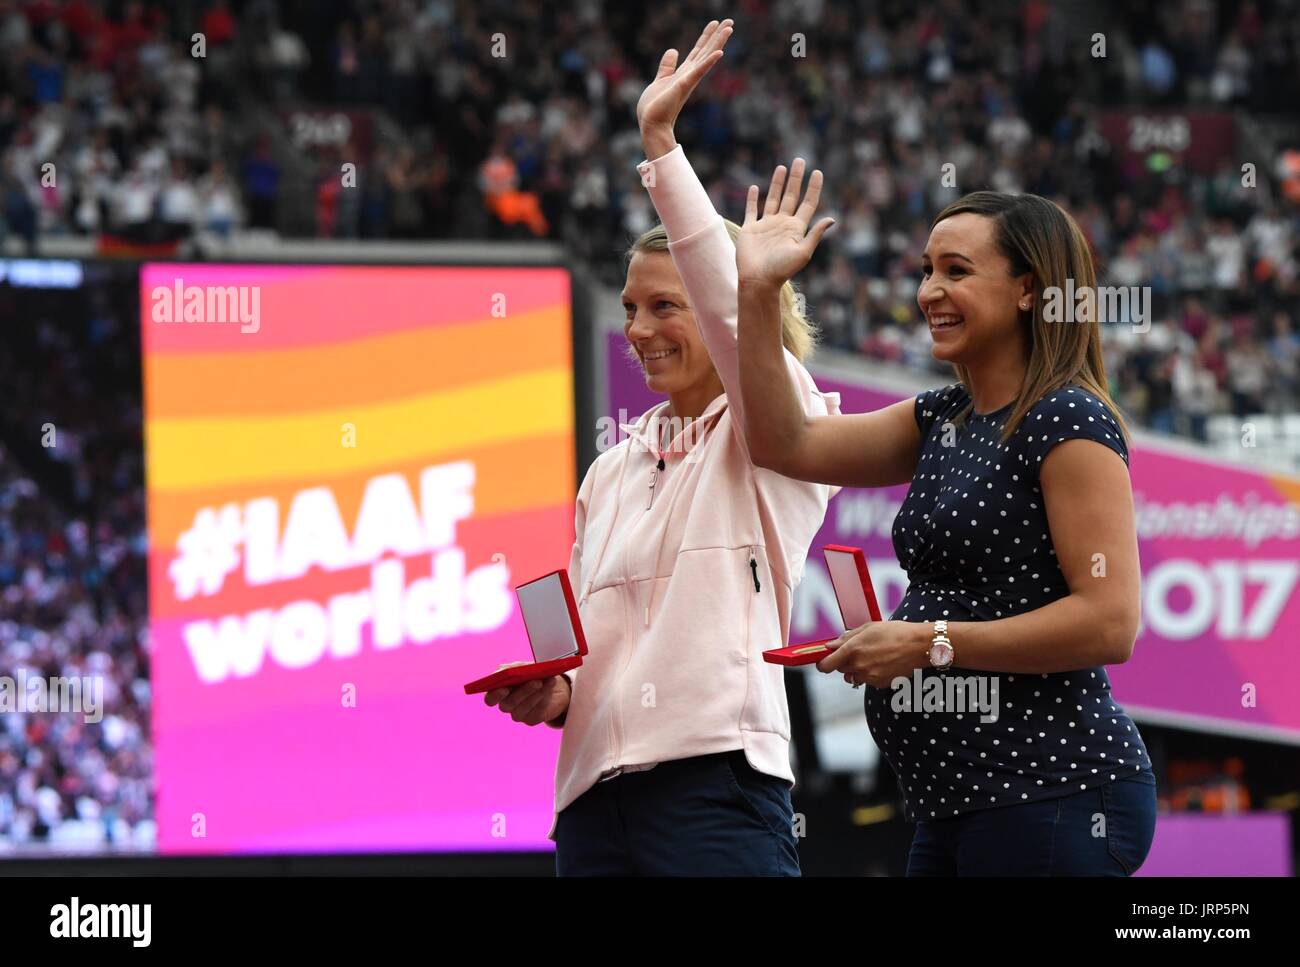 London, UK. 6th Aug, 2017. Former heptathlete Jennifer Oeser (L) of Germany belatedly receives her silver medal in the heptathlon of 2011 at the IAAF World Championships at the Olympic Stadium in Athletics in London, UK, 6 August 2017. Britain's Jessica Ennis (r) was named world champion. Oeser moved from third to second place after then-champion Tatyana Chernova of Russia was disqualified for doping. Photo: Bernd Thissen/dpa/Alamy Live News Stock Photo